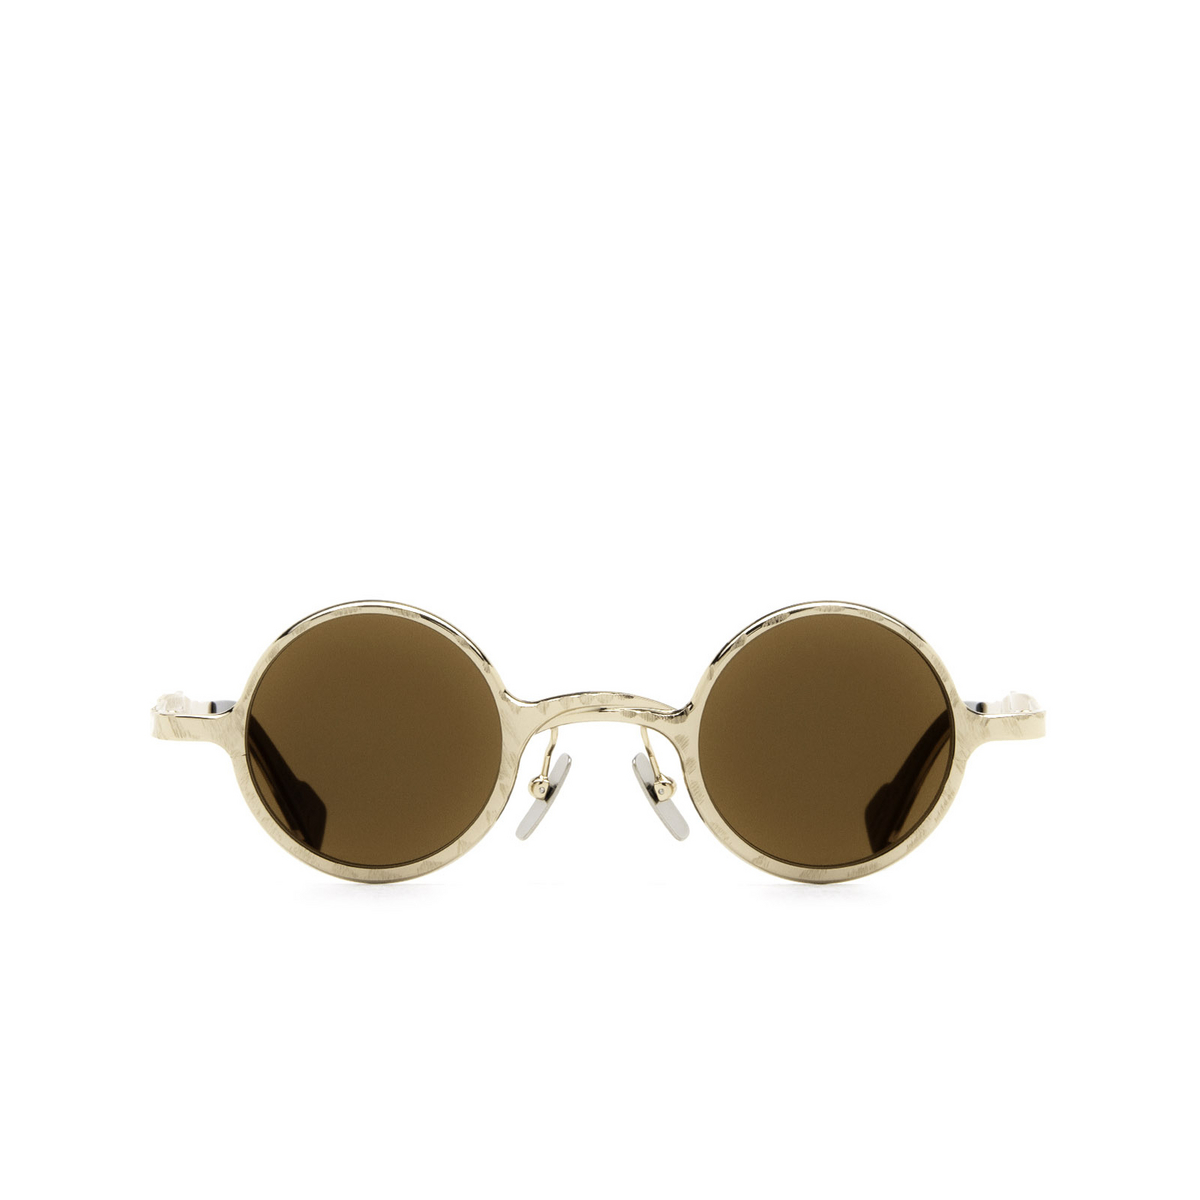 Kuboraum® Round Sunglasses: Z17 color Rosegold Pg - front view.